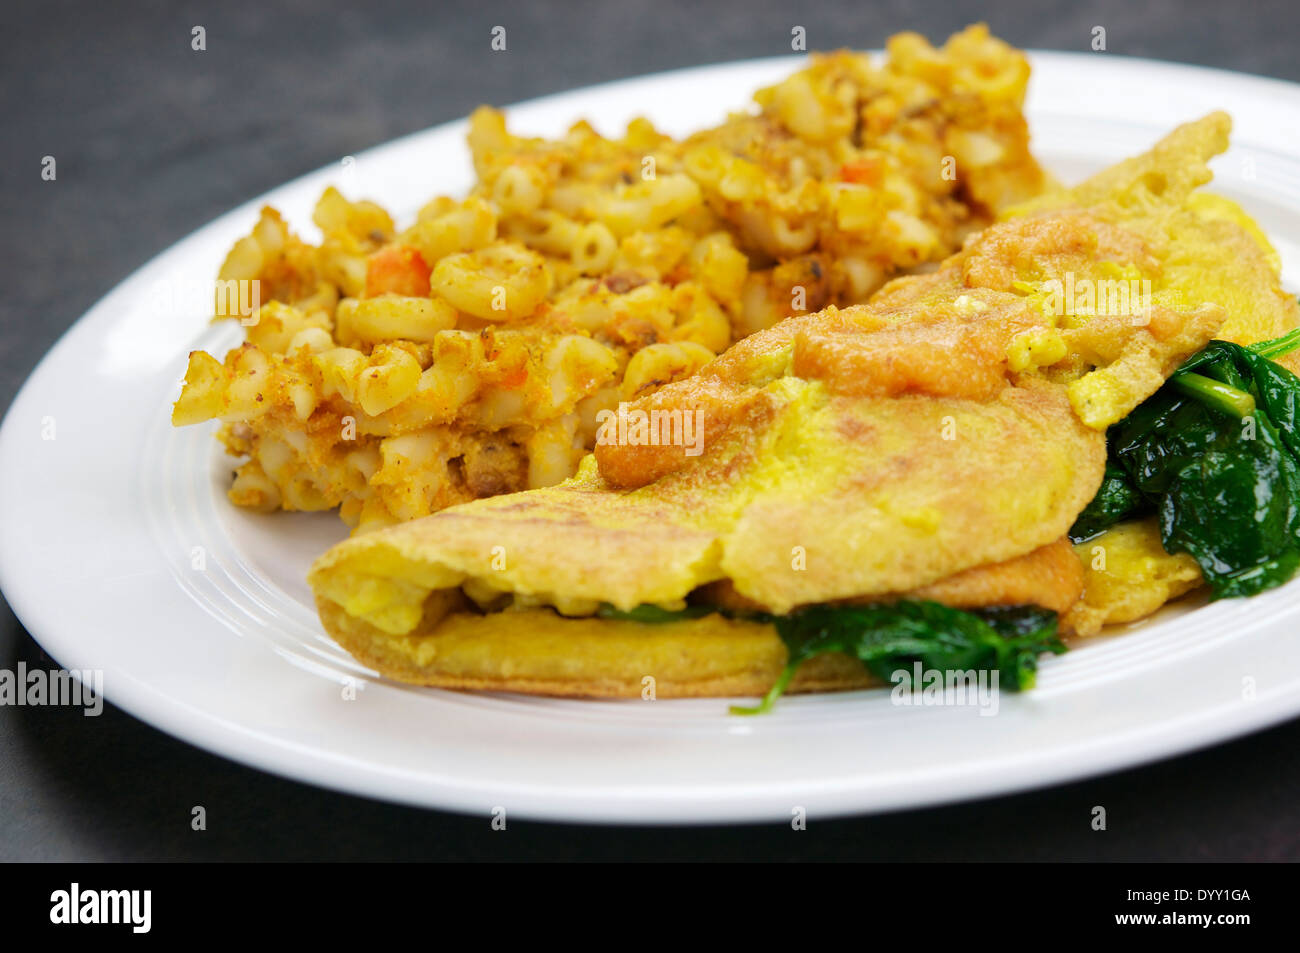 Macaroni pasta with a cheddar type sauce baked in the oven to a nice crispy texture. Served with an egg free spinach omelet. Stock Photo